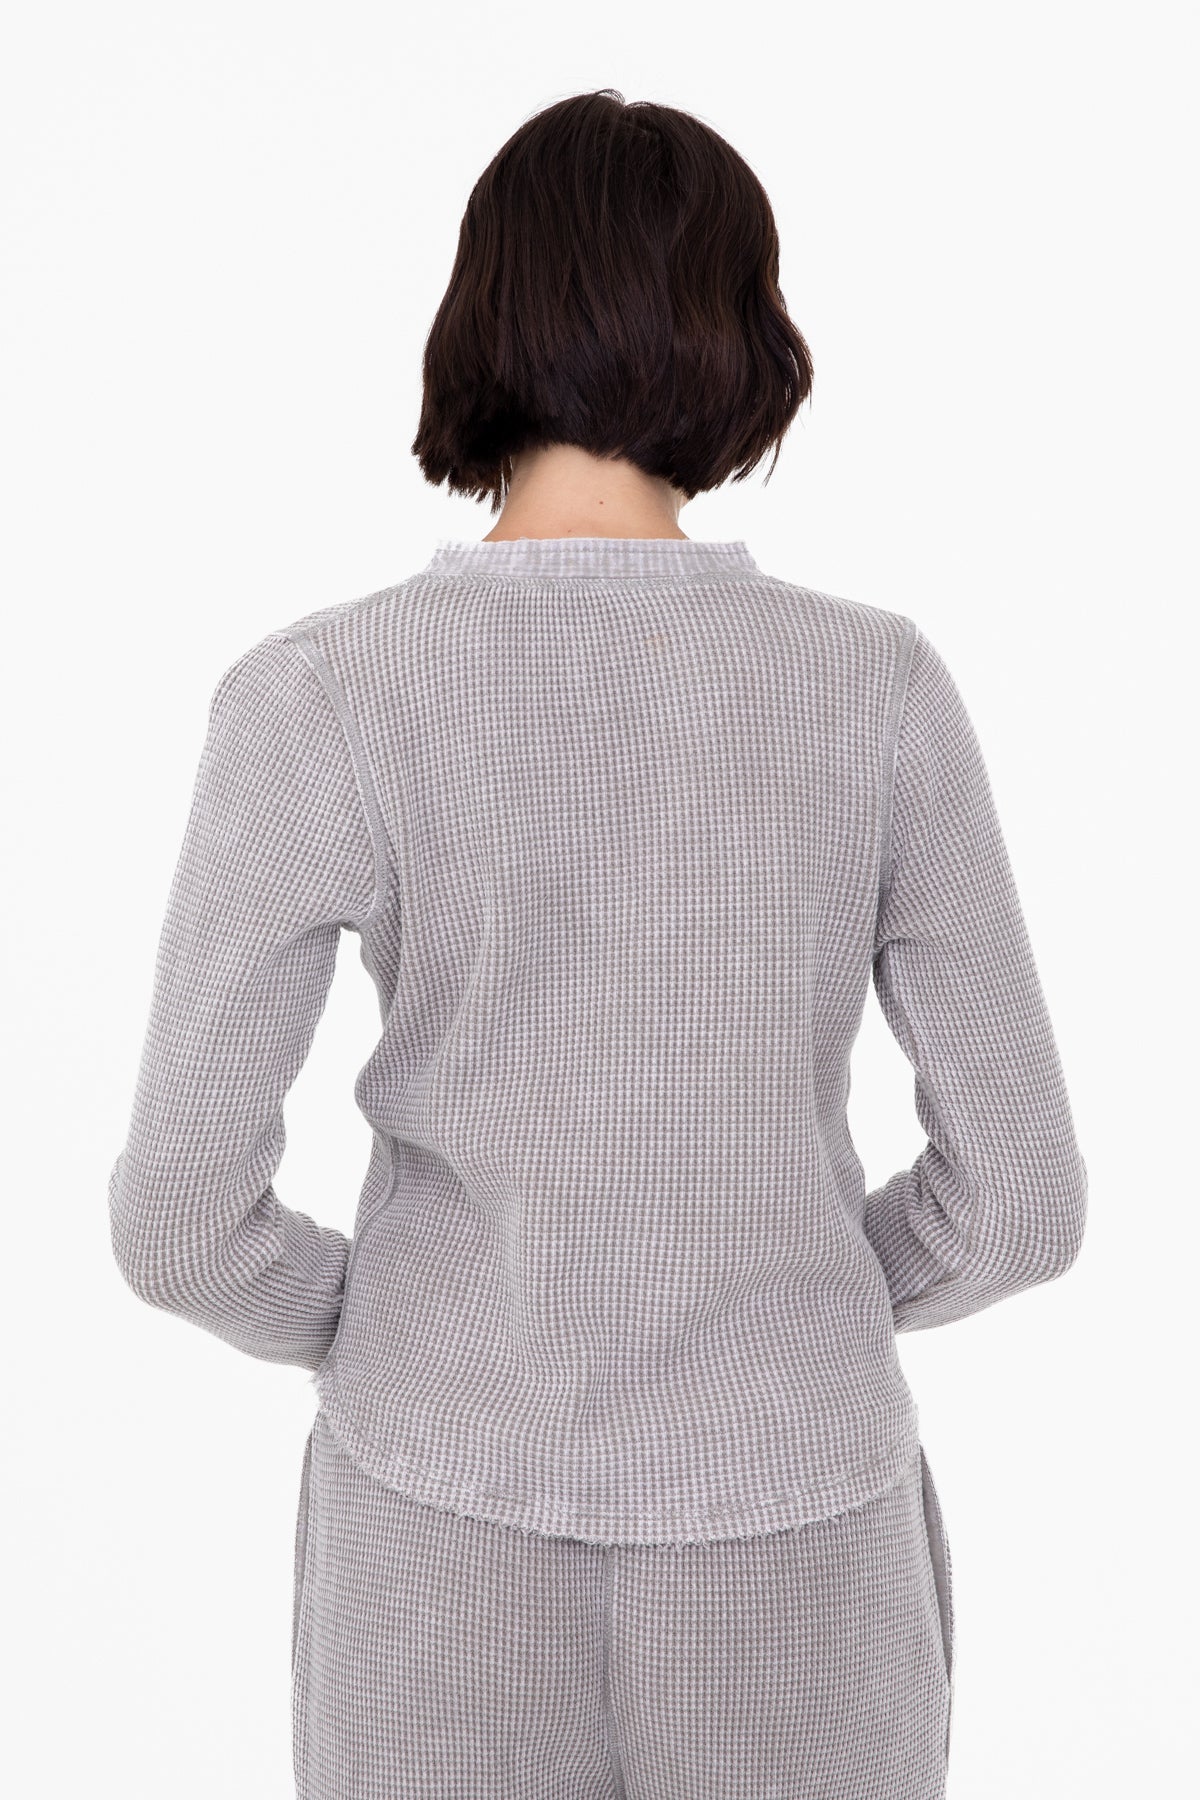 Distressed Mineral-Washed Long Sleeve Top || Slate